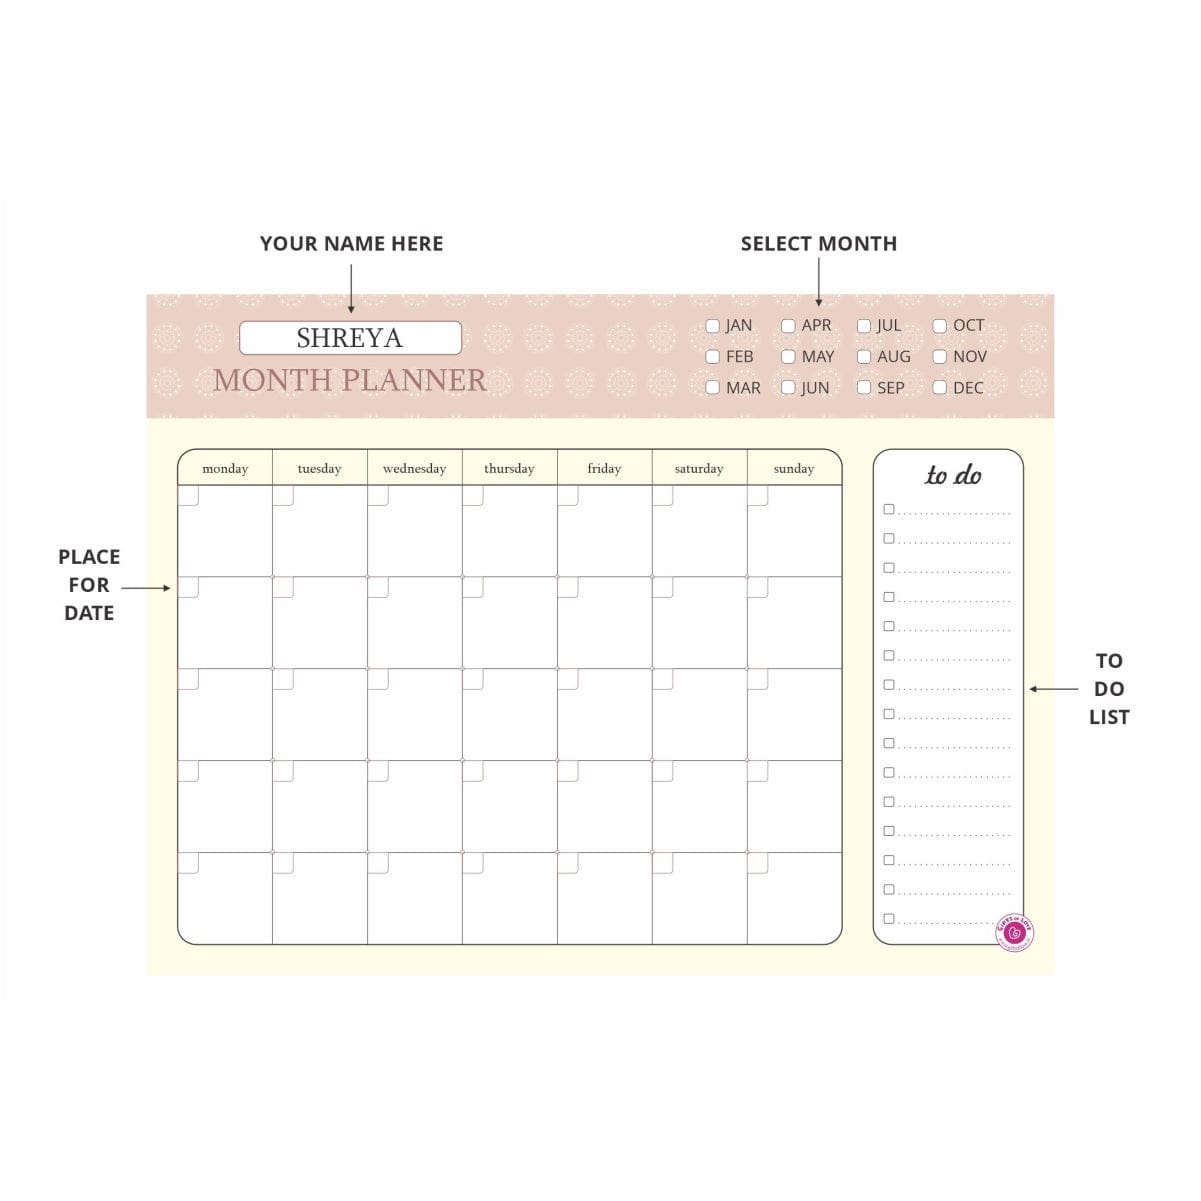 Gifts of Love Month Planner Undated